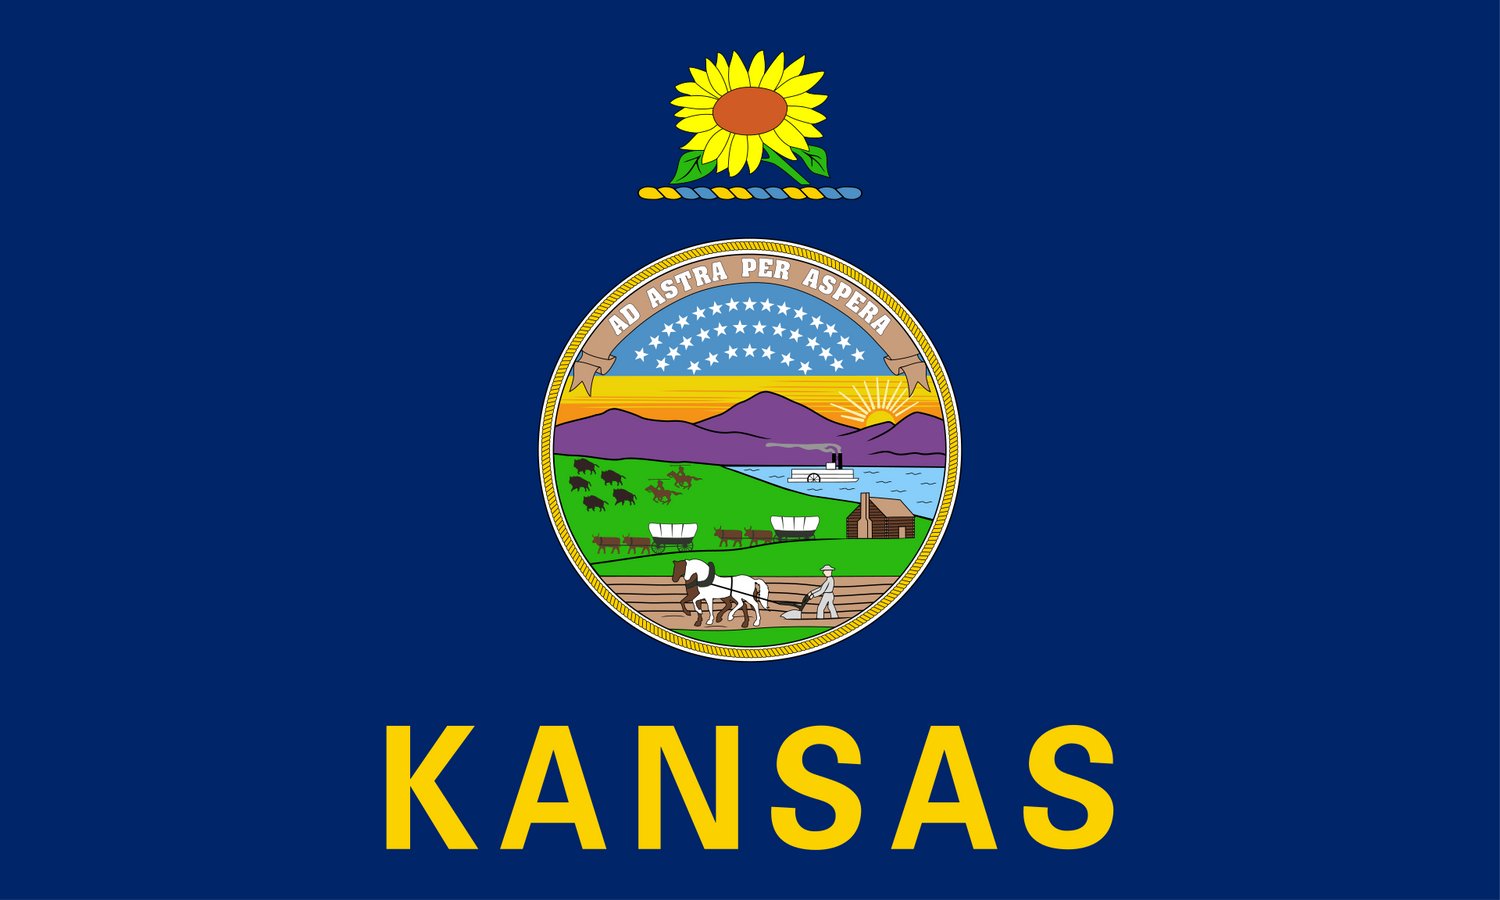 The official state flag of Kansas was adopted in 1961 and features a dark-blue silk rectangle representing Kansas arranged horizontally with the state seal aligned in the center. - History By Mail